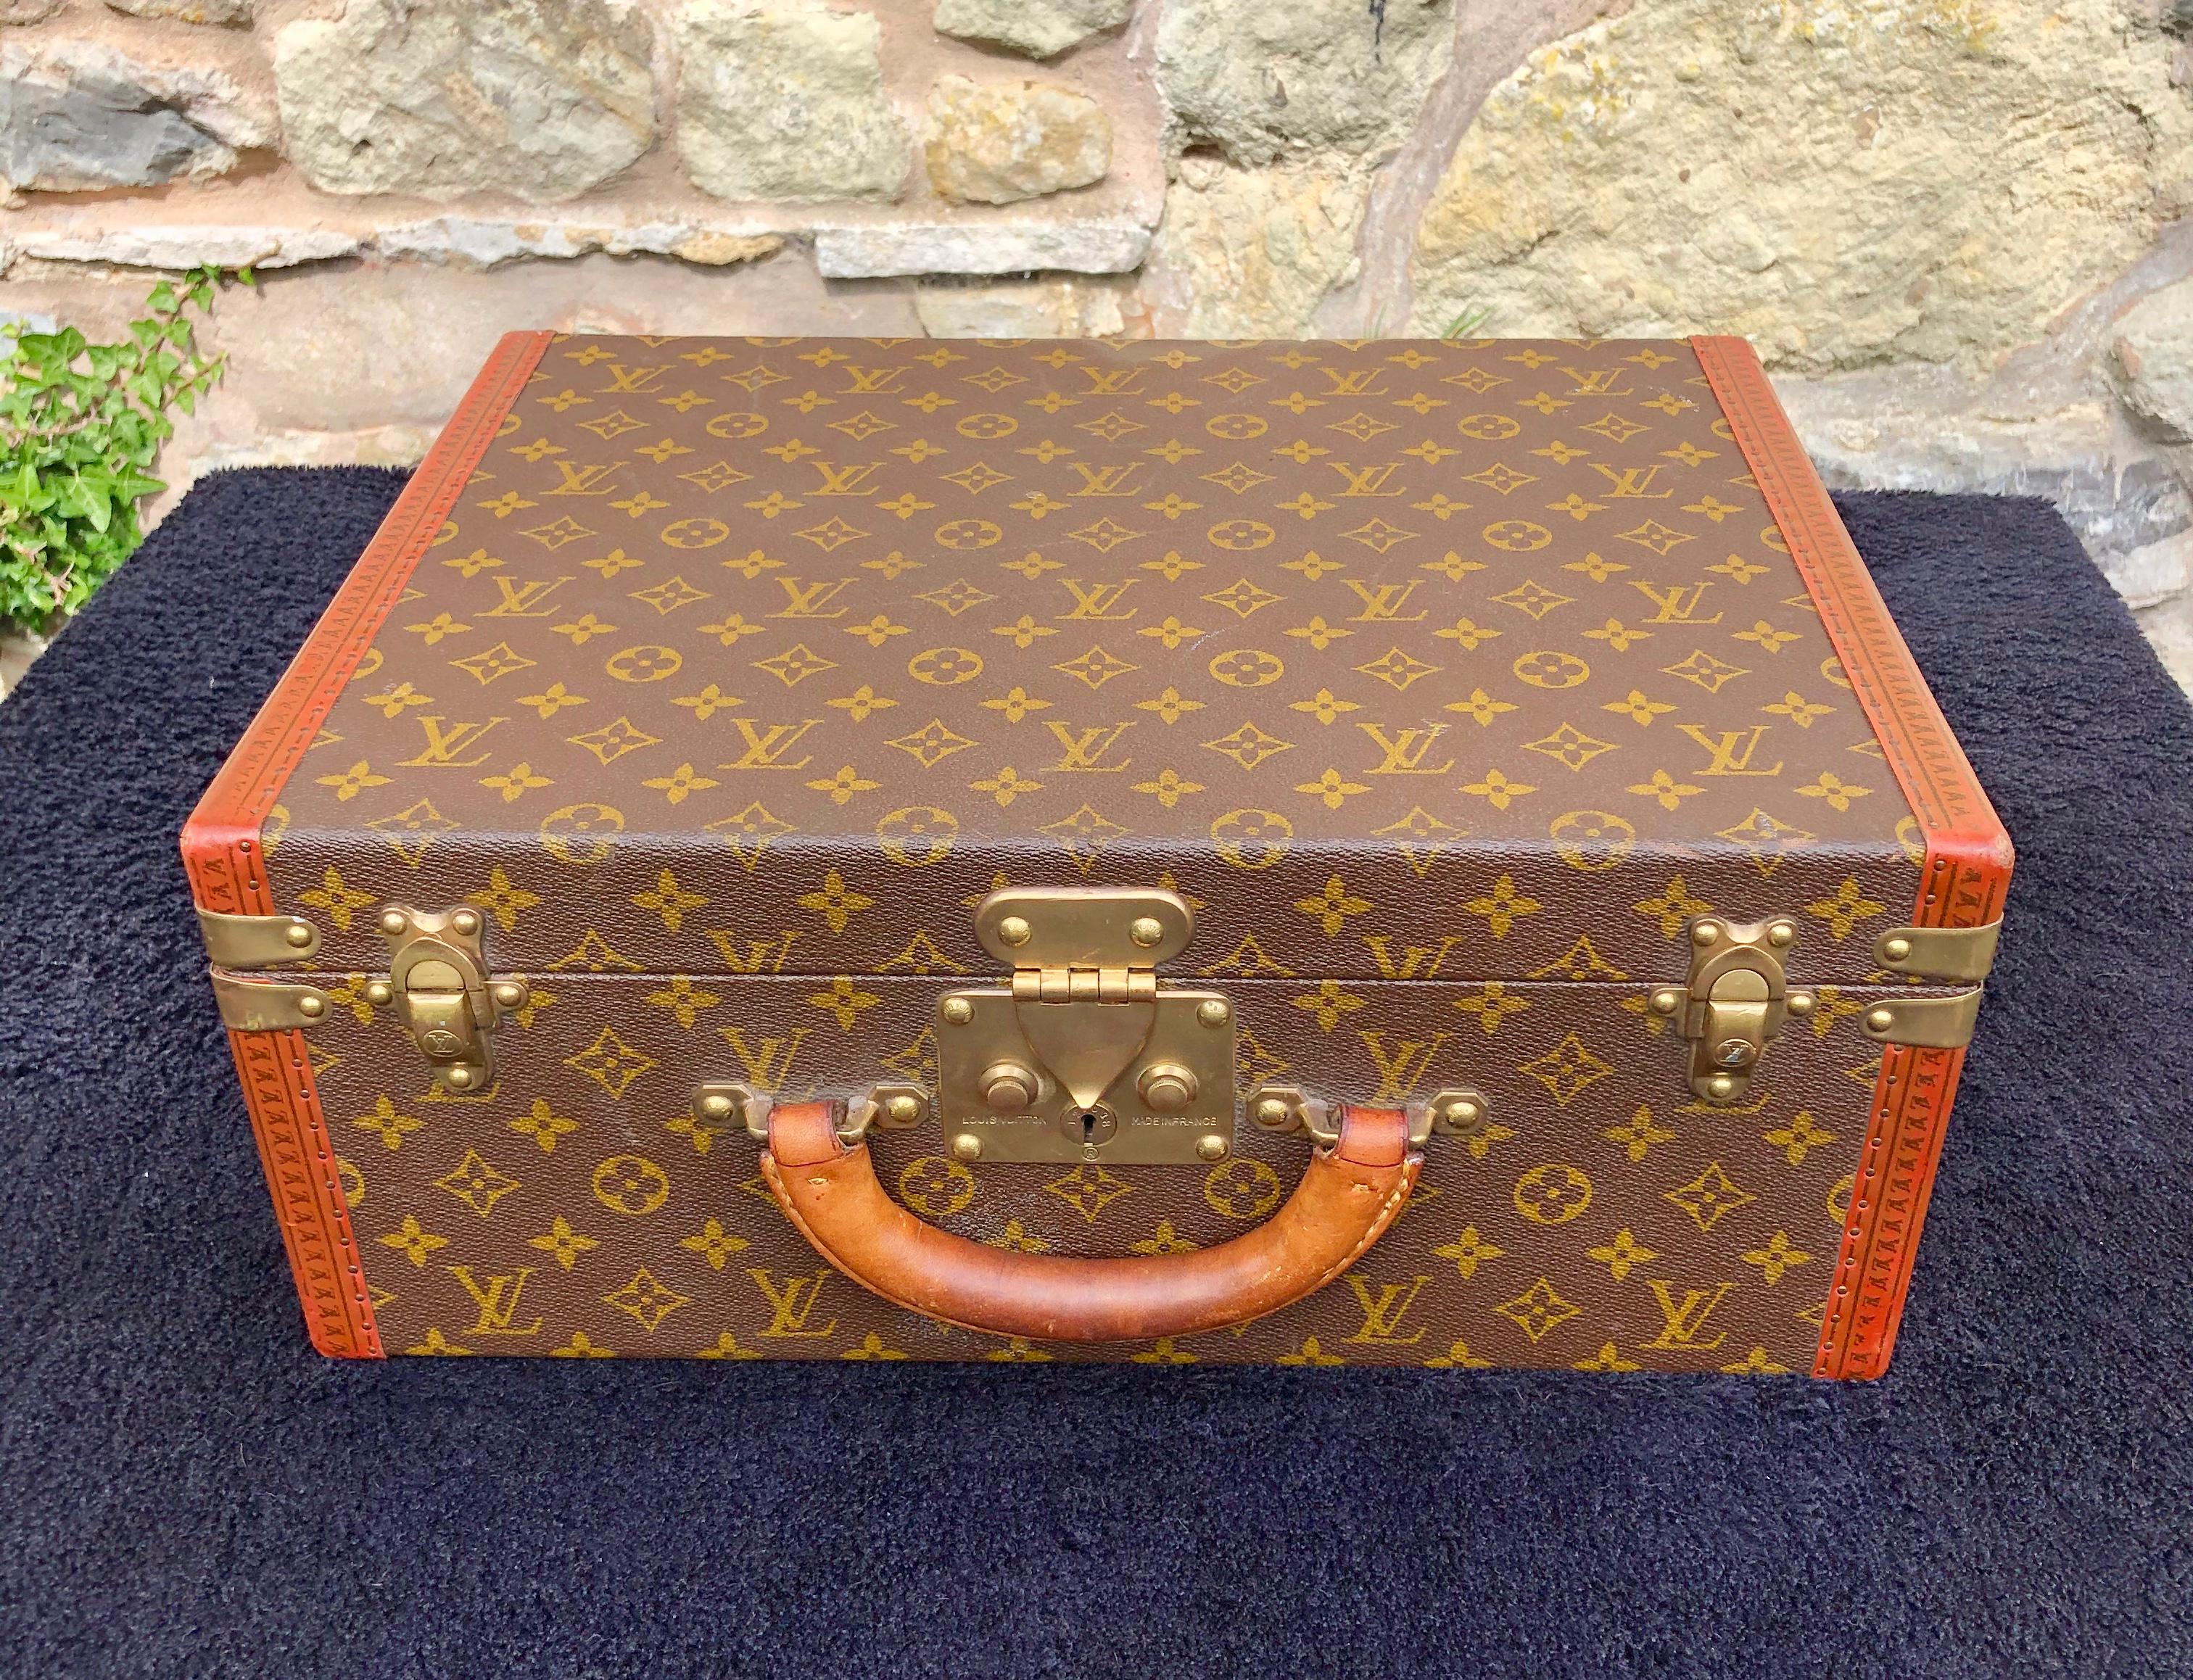 1950's LOUIS VUITTON Monogram Canvas Super President Briefcase/Trunk. This highly sought after vintage Louis Vuitton briefcase is a larger version of the iconic President Classeur briefcase and embodies the rich travel heritage of the brand. It is a